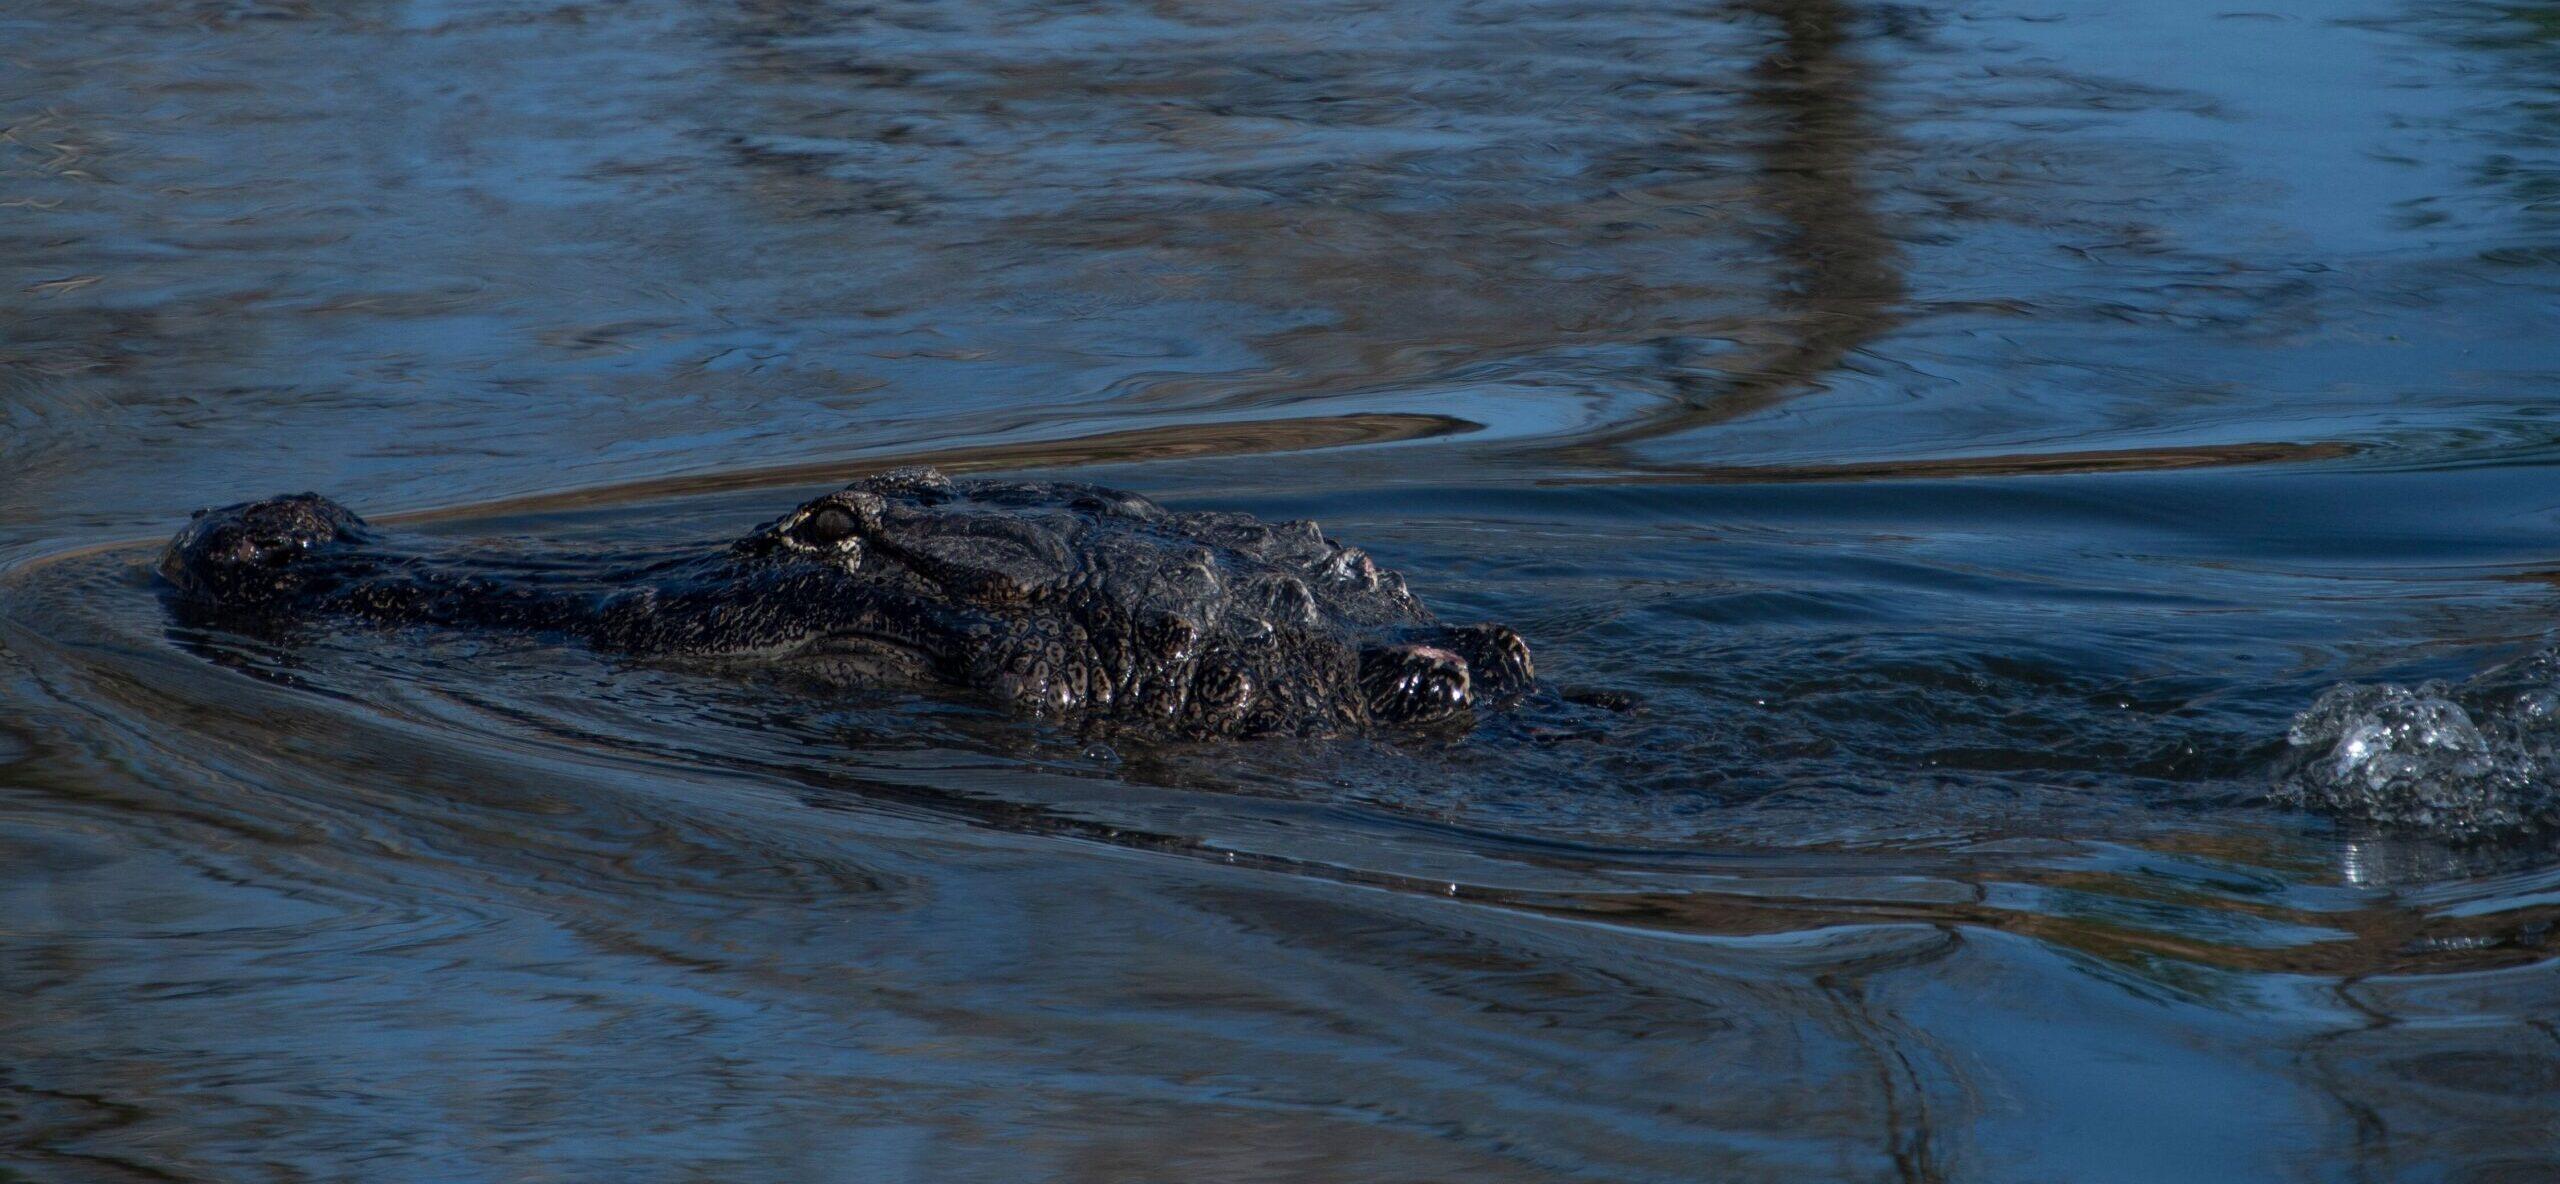 Passerby Sees Horrific Sight In Largo Florida: Alligator With Lifeless Body!